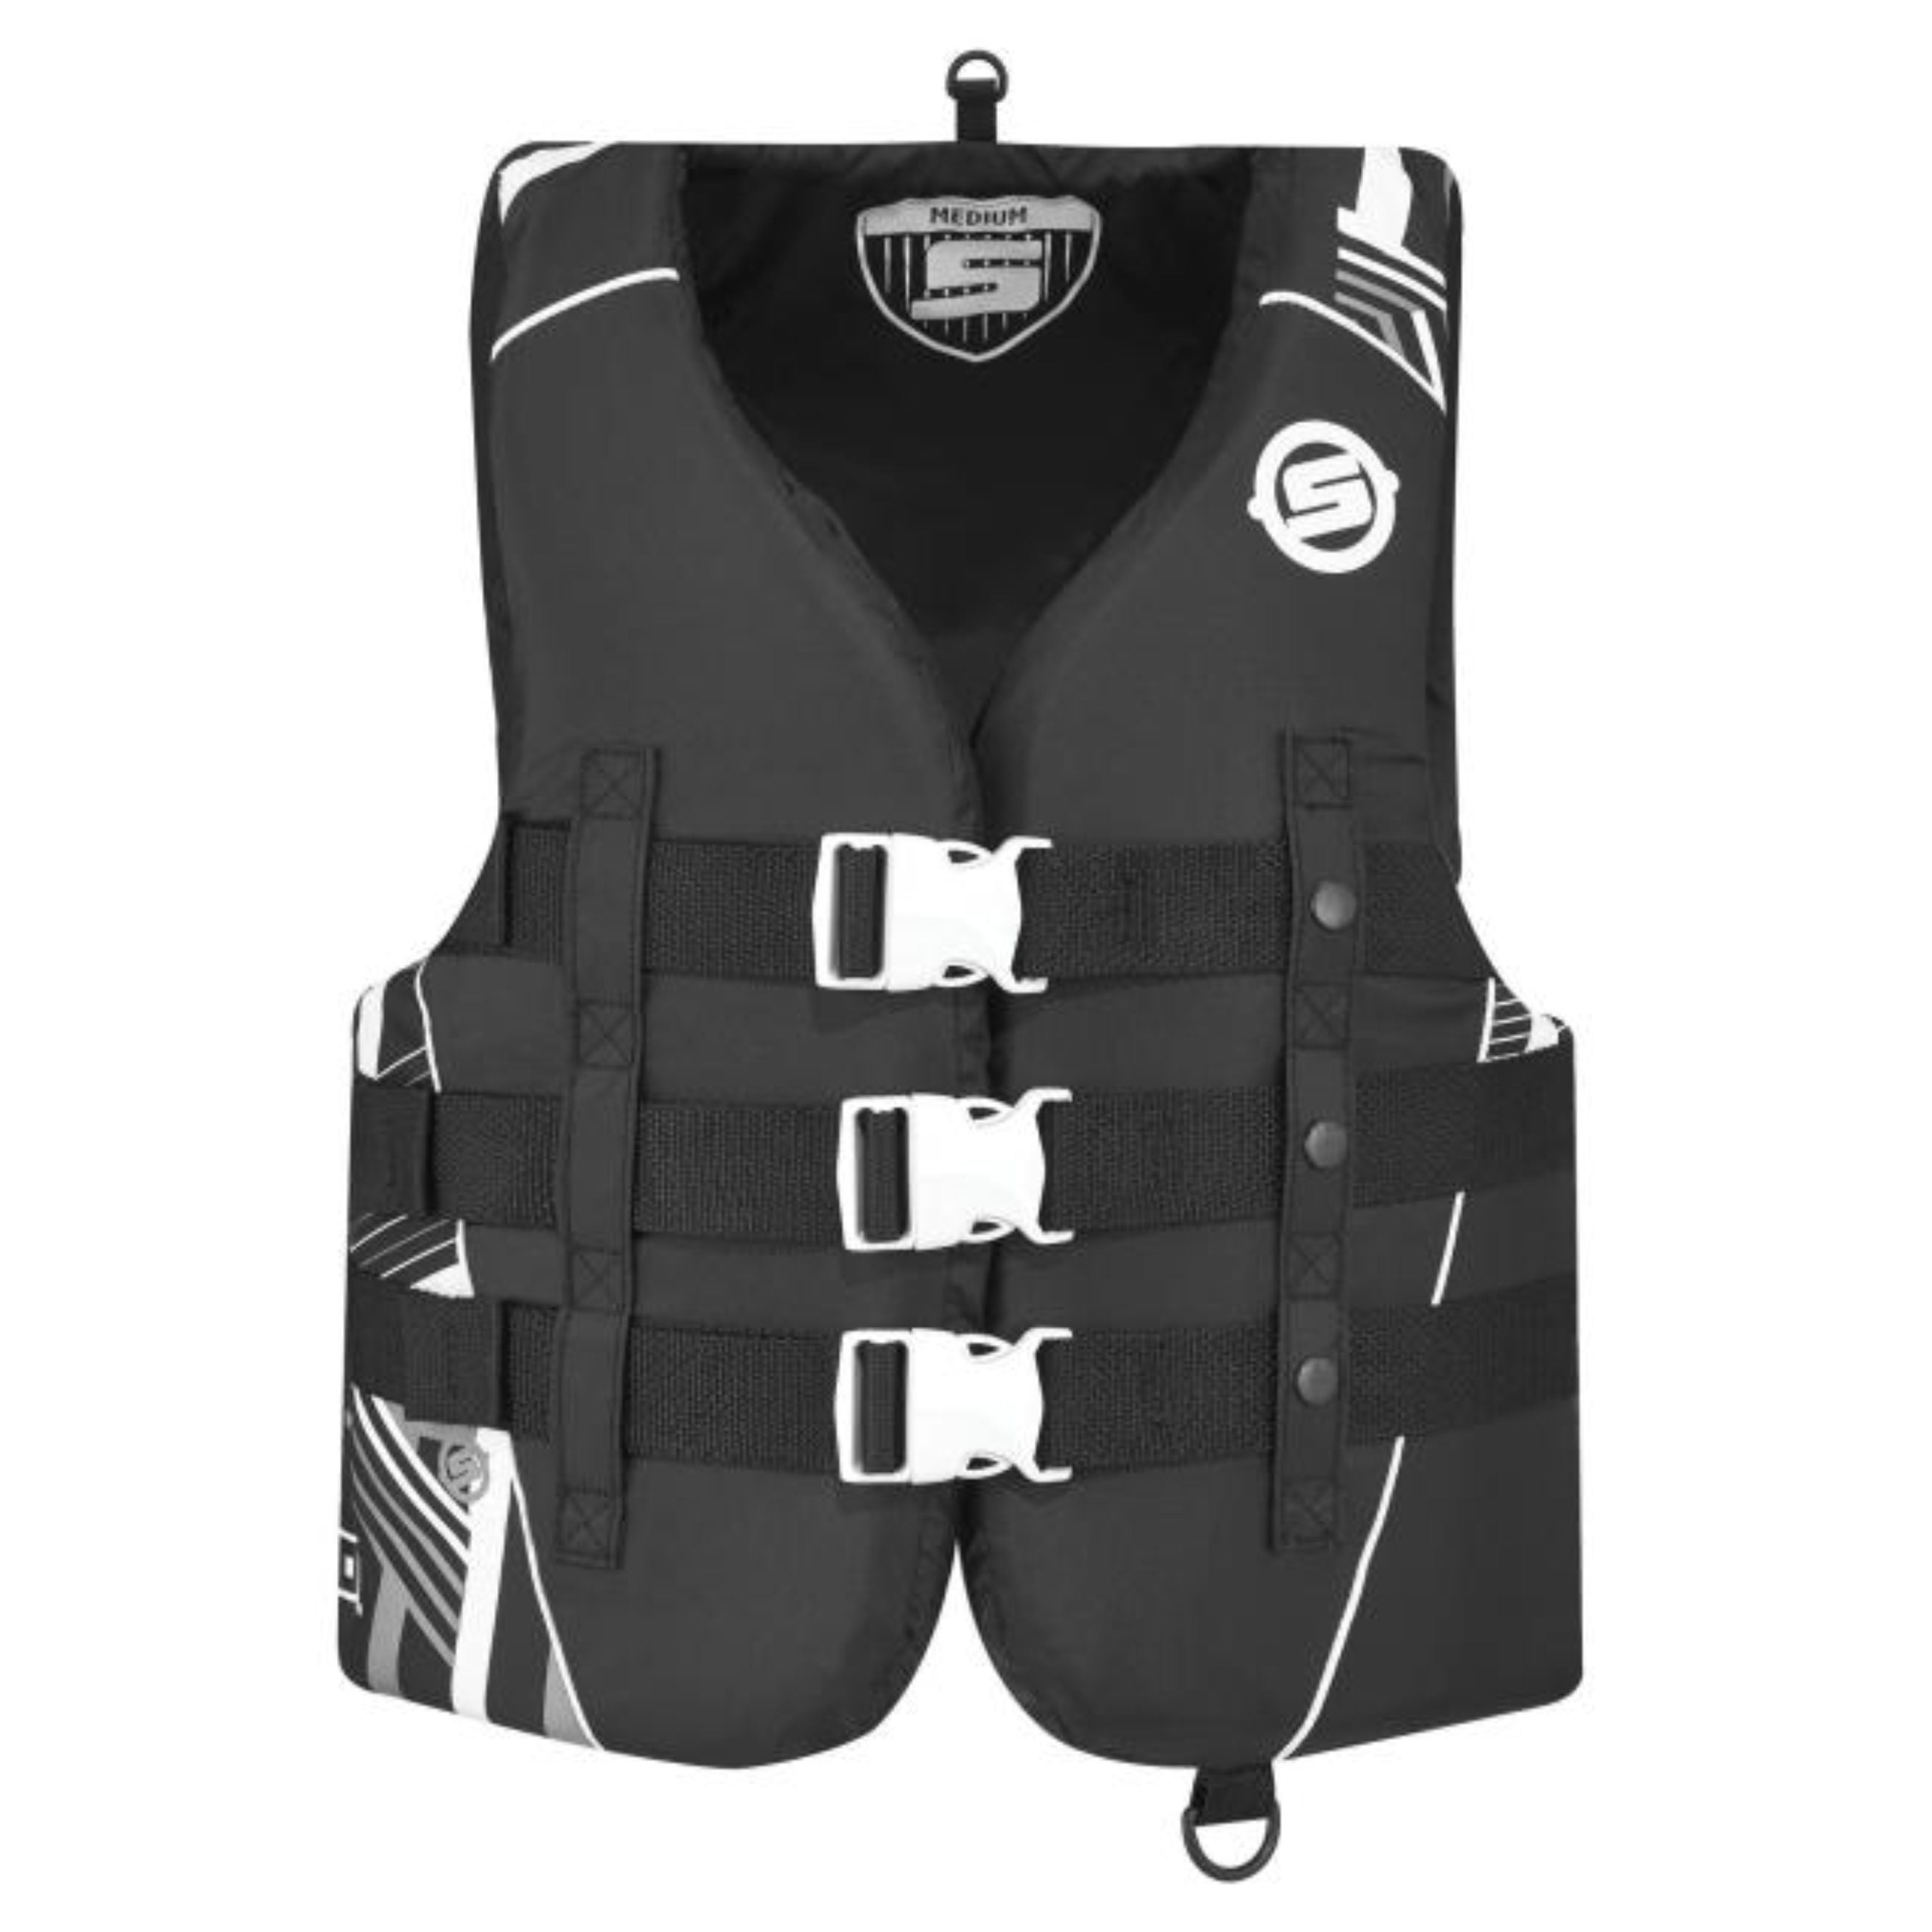 Sea-Doo Vest Vest Individual Motion Float Device Nylon Quick Drying for Water Motorcycles and Water Sports 